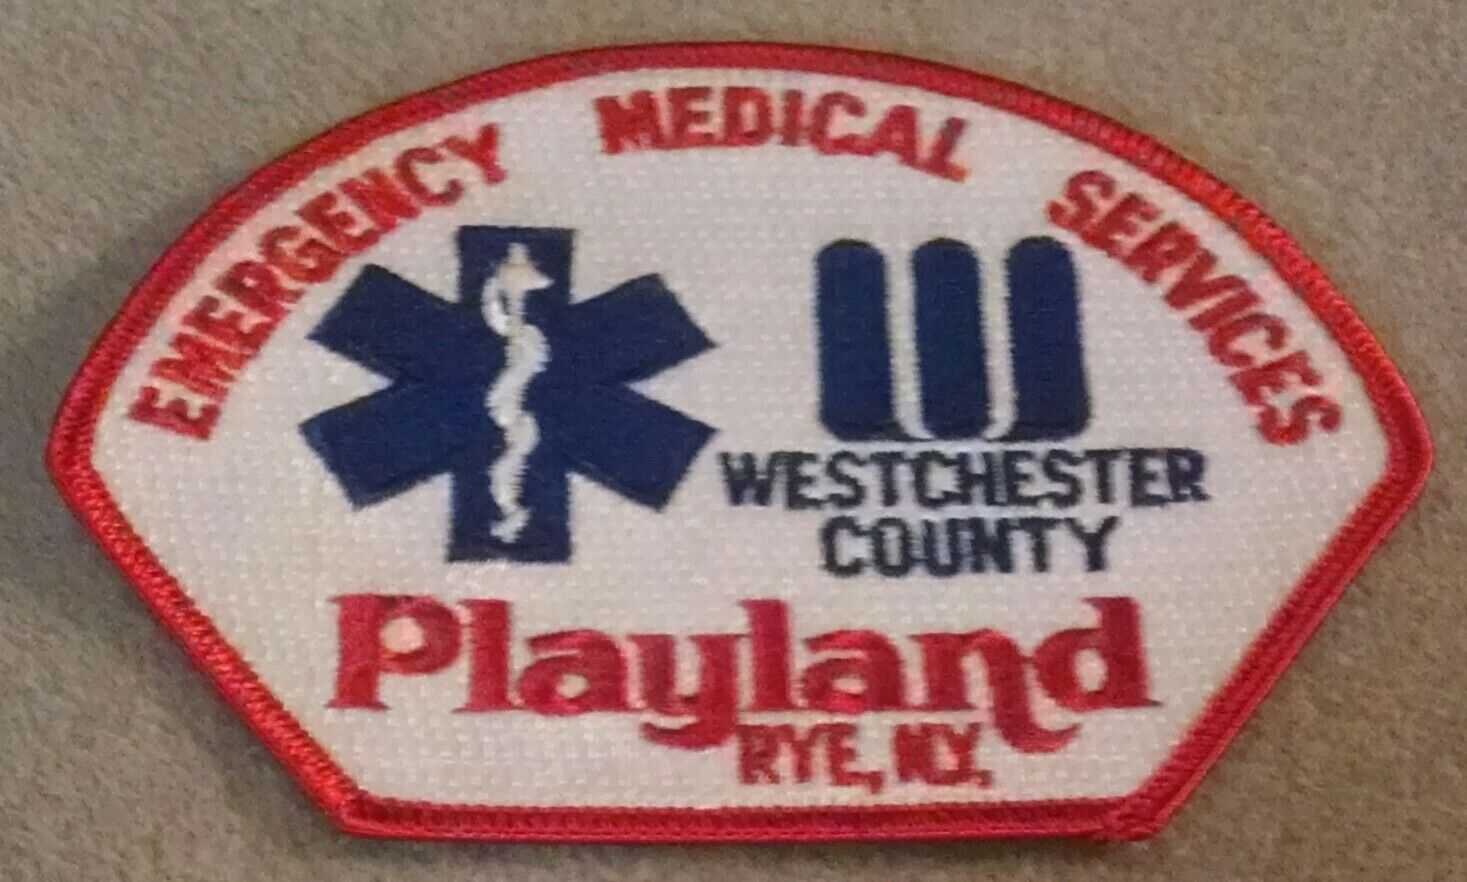 Playland Rye NY Emergency Medical Services Westchester County Patch LOOK RARE